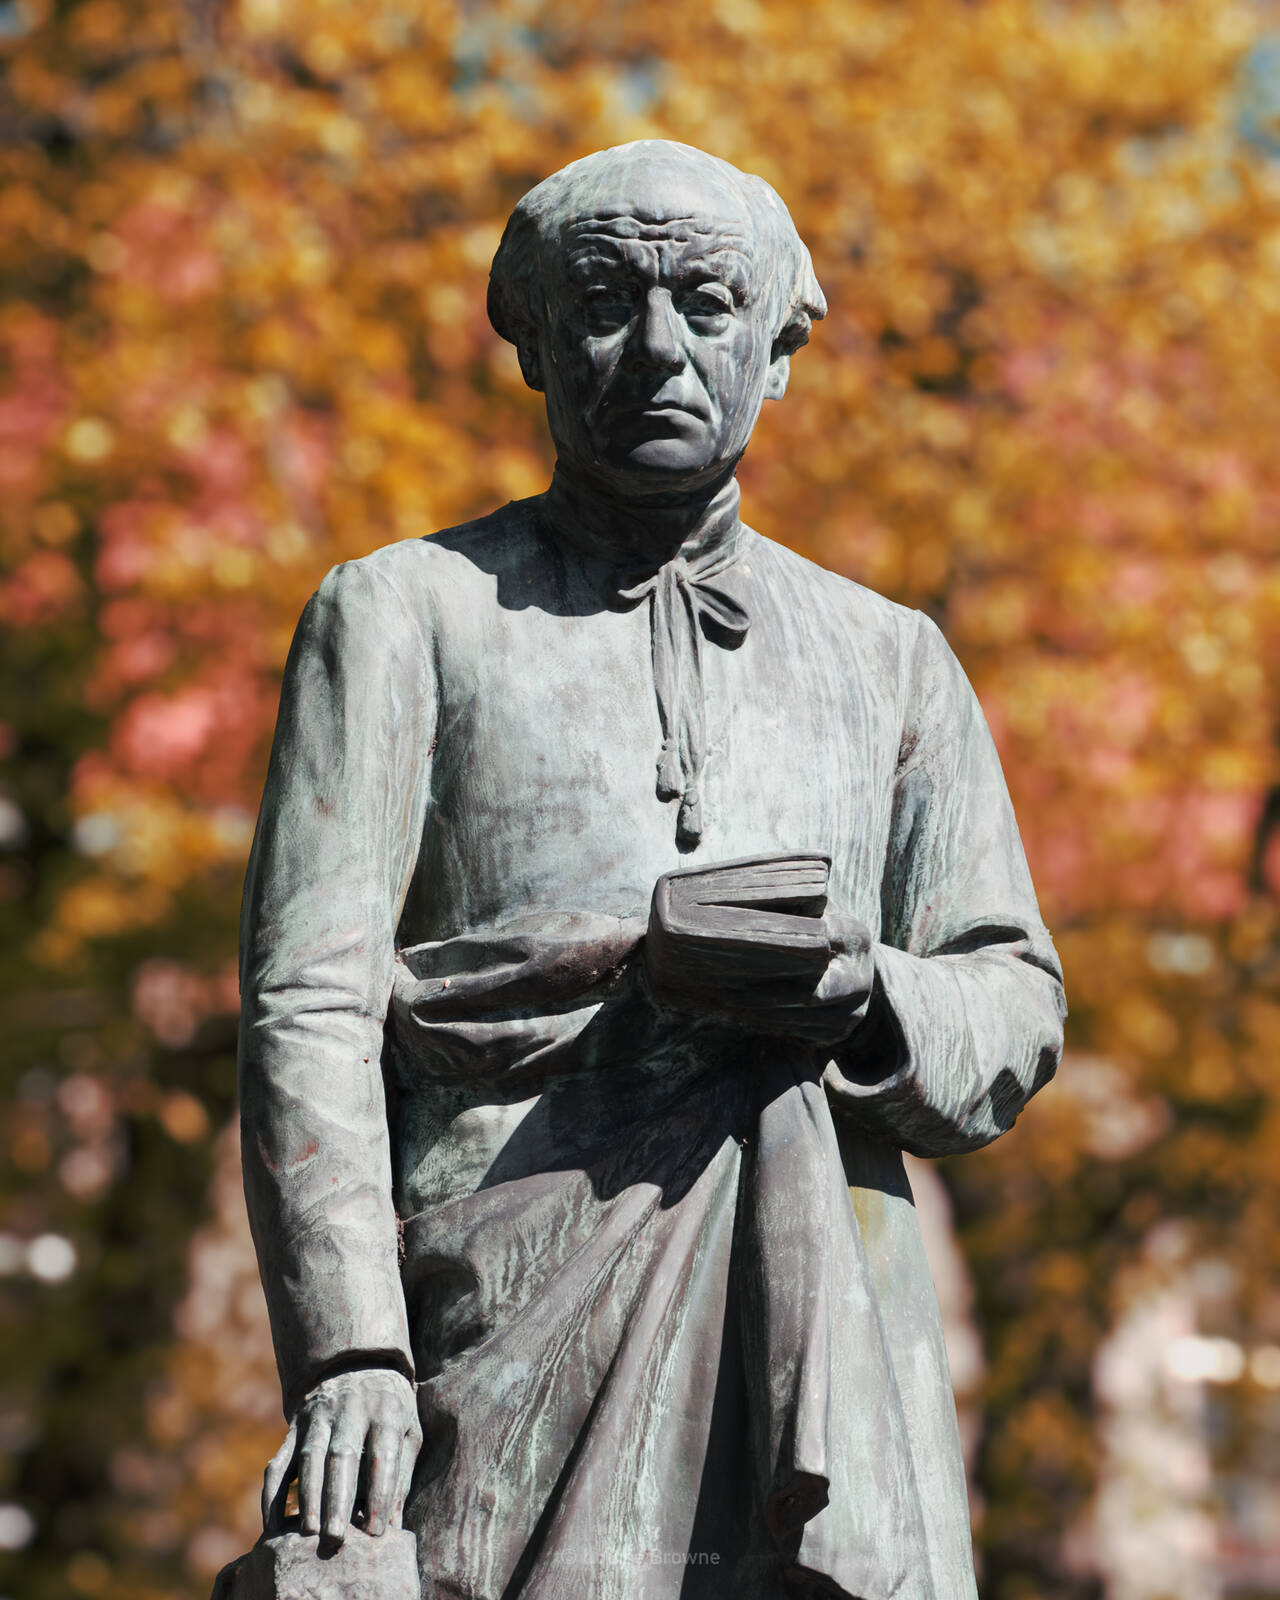 Image of Guido Gezelleplein (Guido Gezelle Square) by Louise Browne